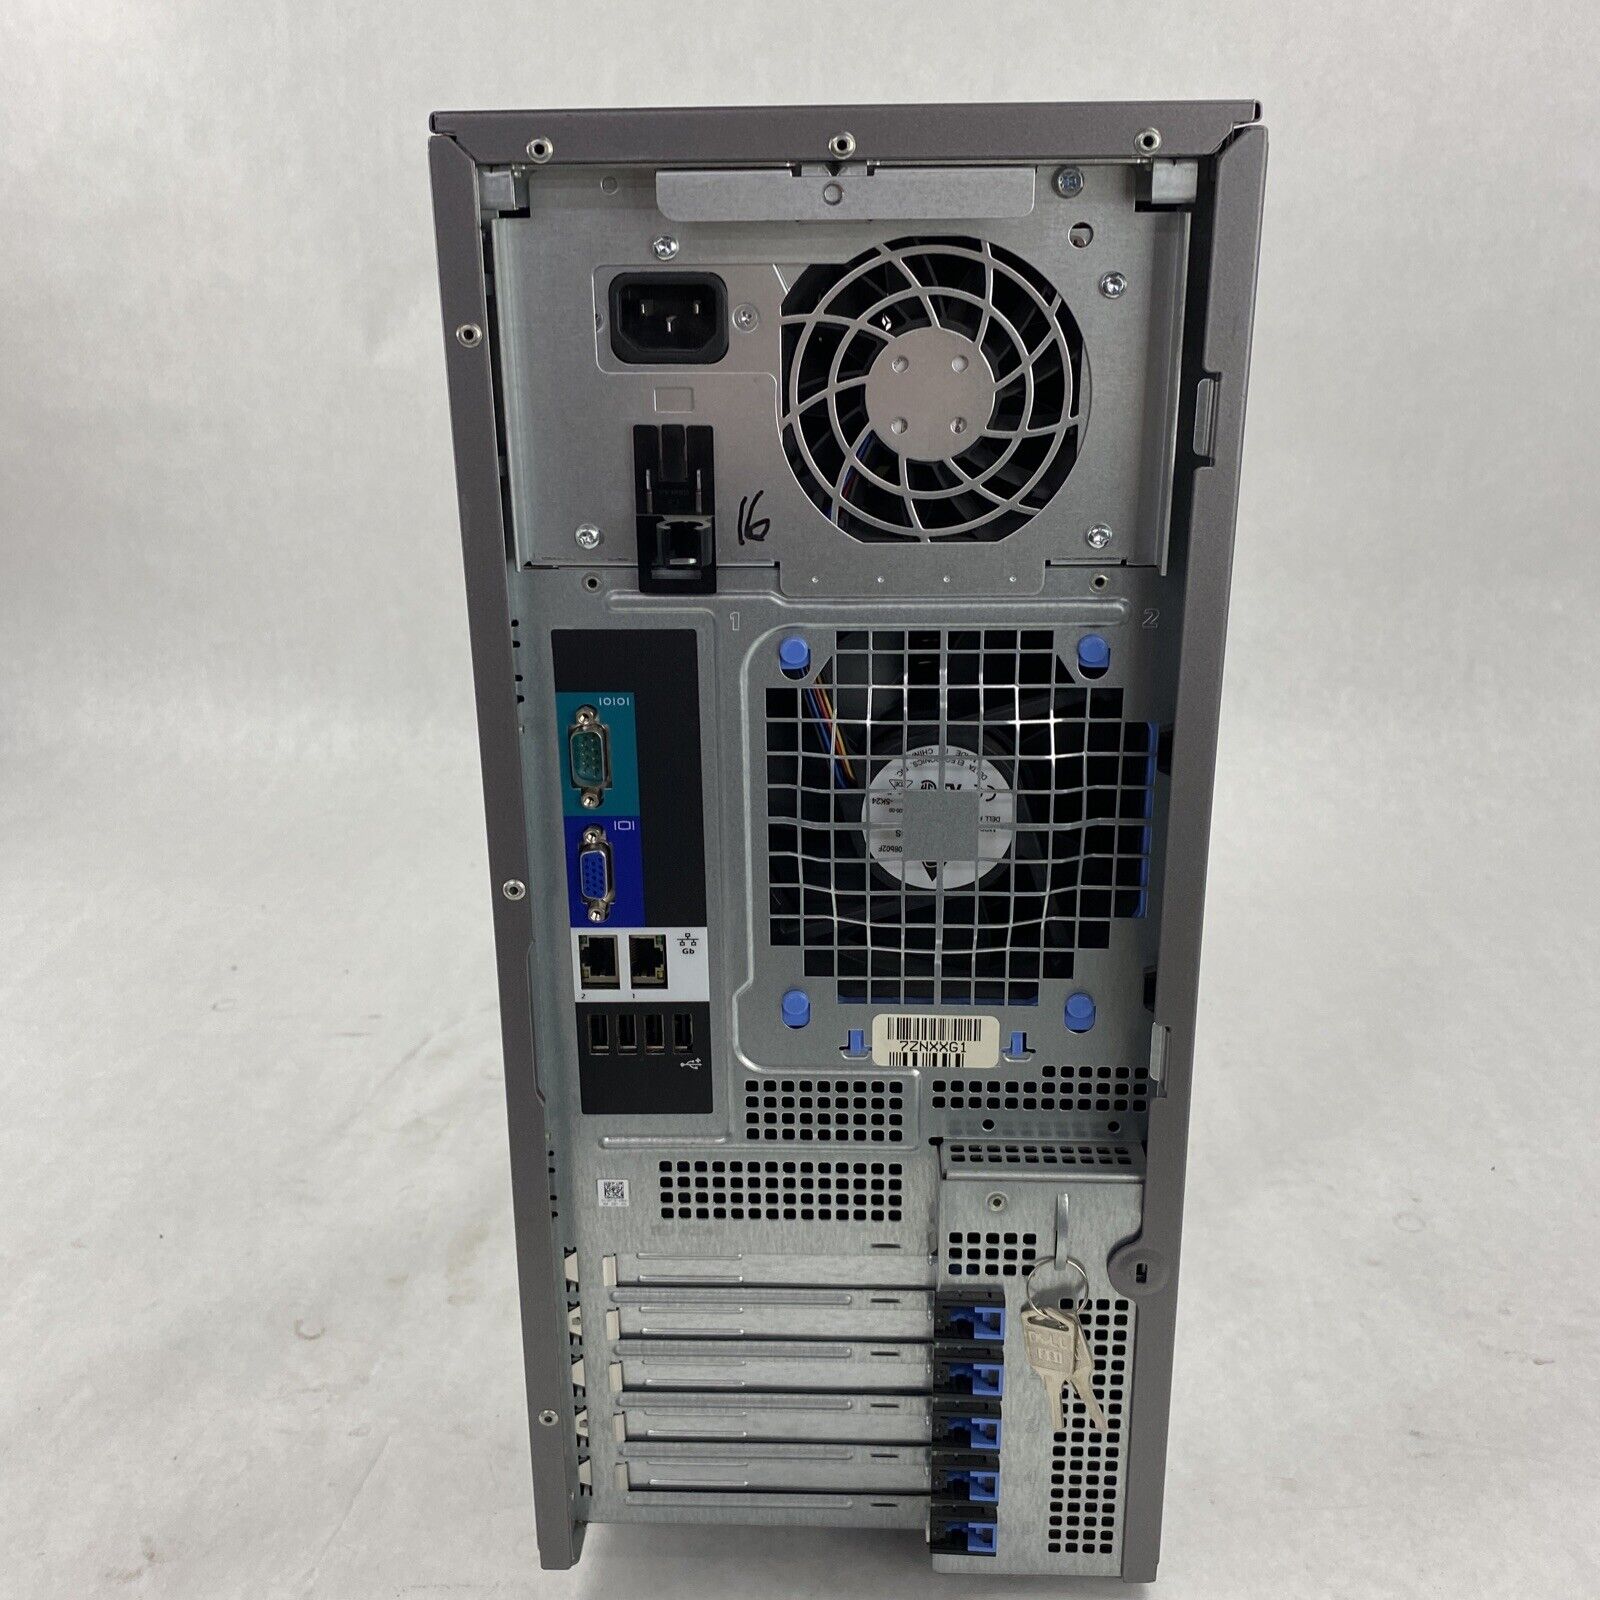 Dell PowerEdge T300 Tower Server Xeon X83L3 2.5GHz 2GB RAM No HDD/OS